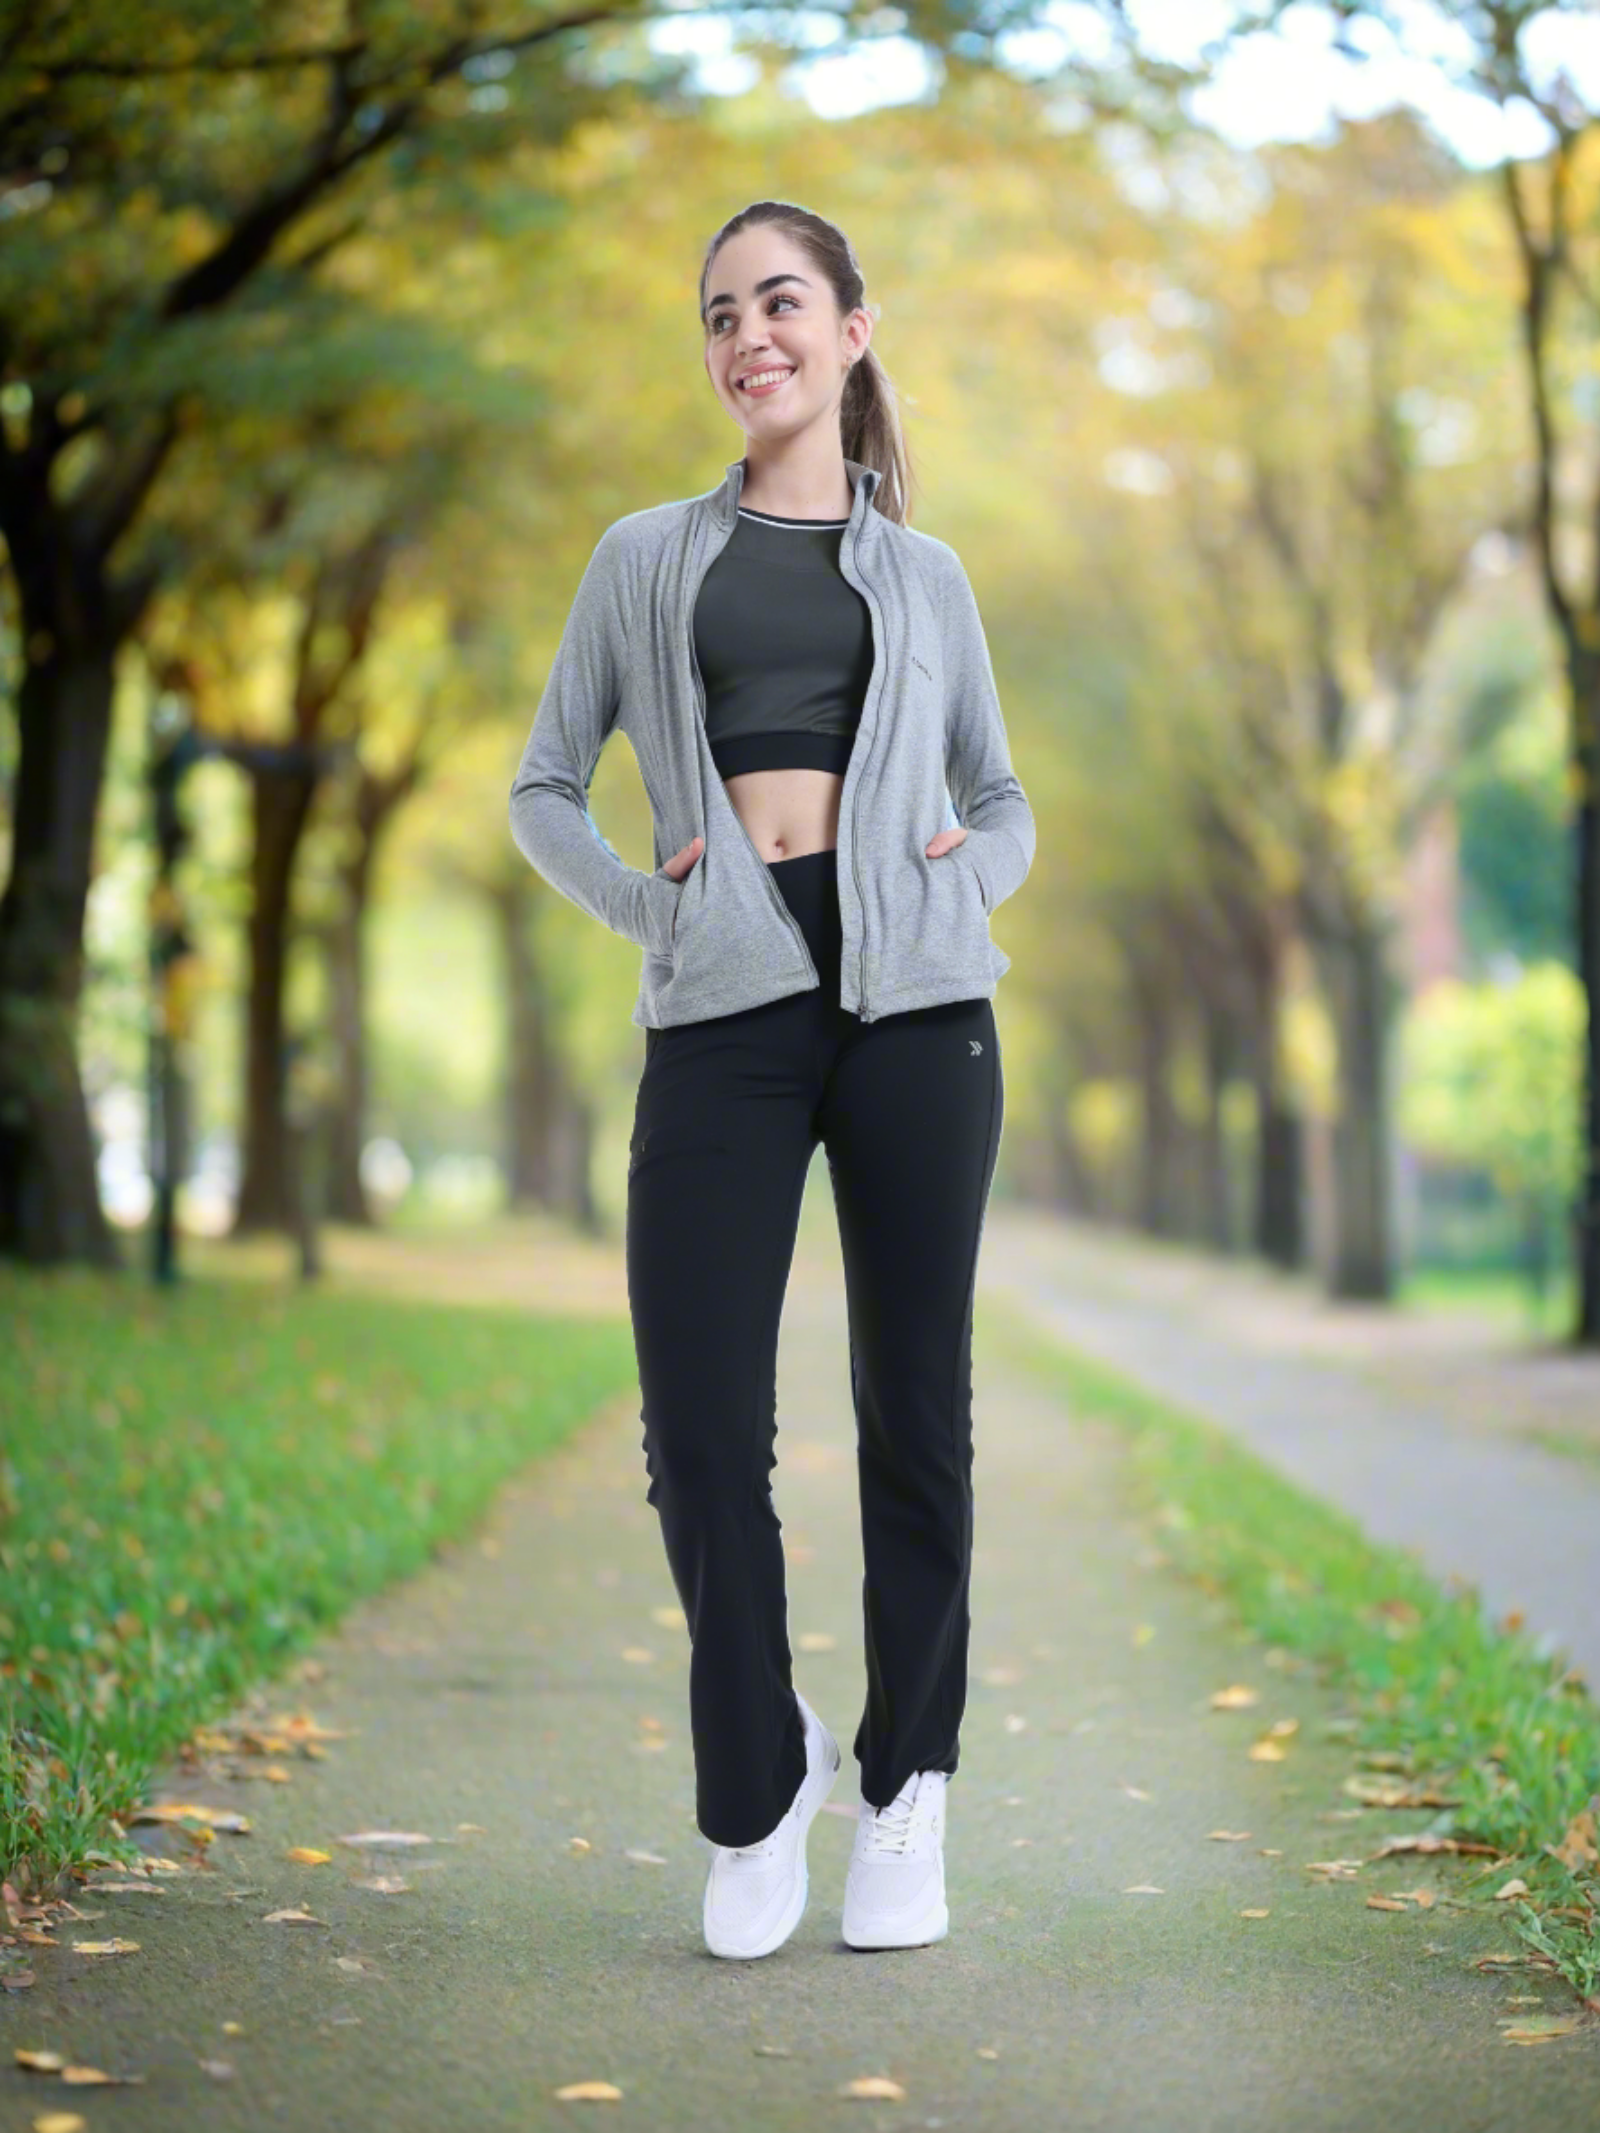 Women's All Weather High Neck Gym Jacket